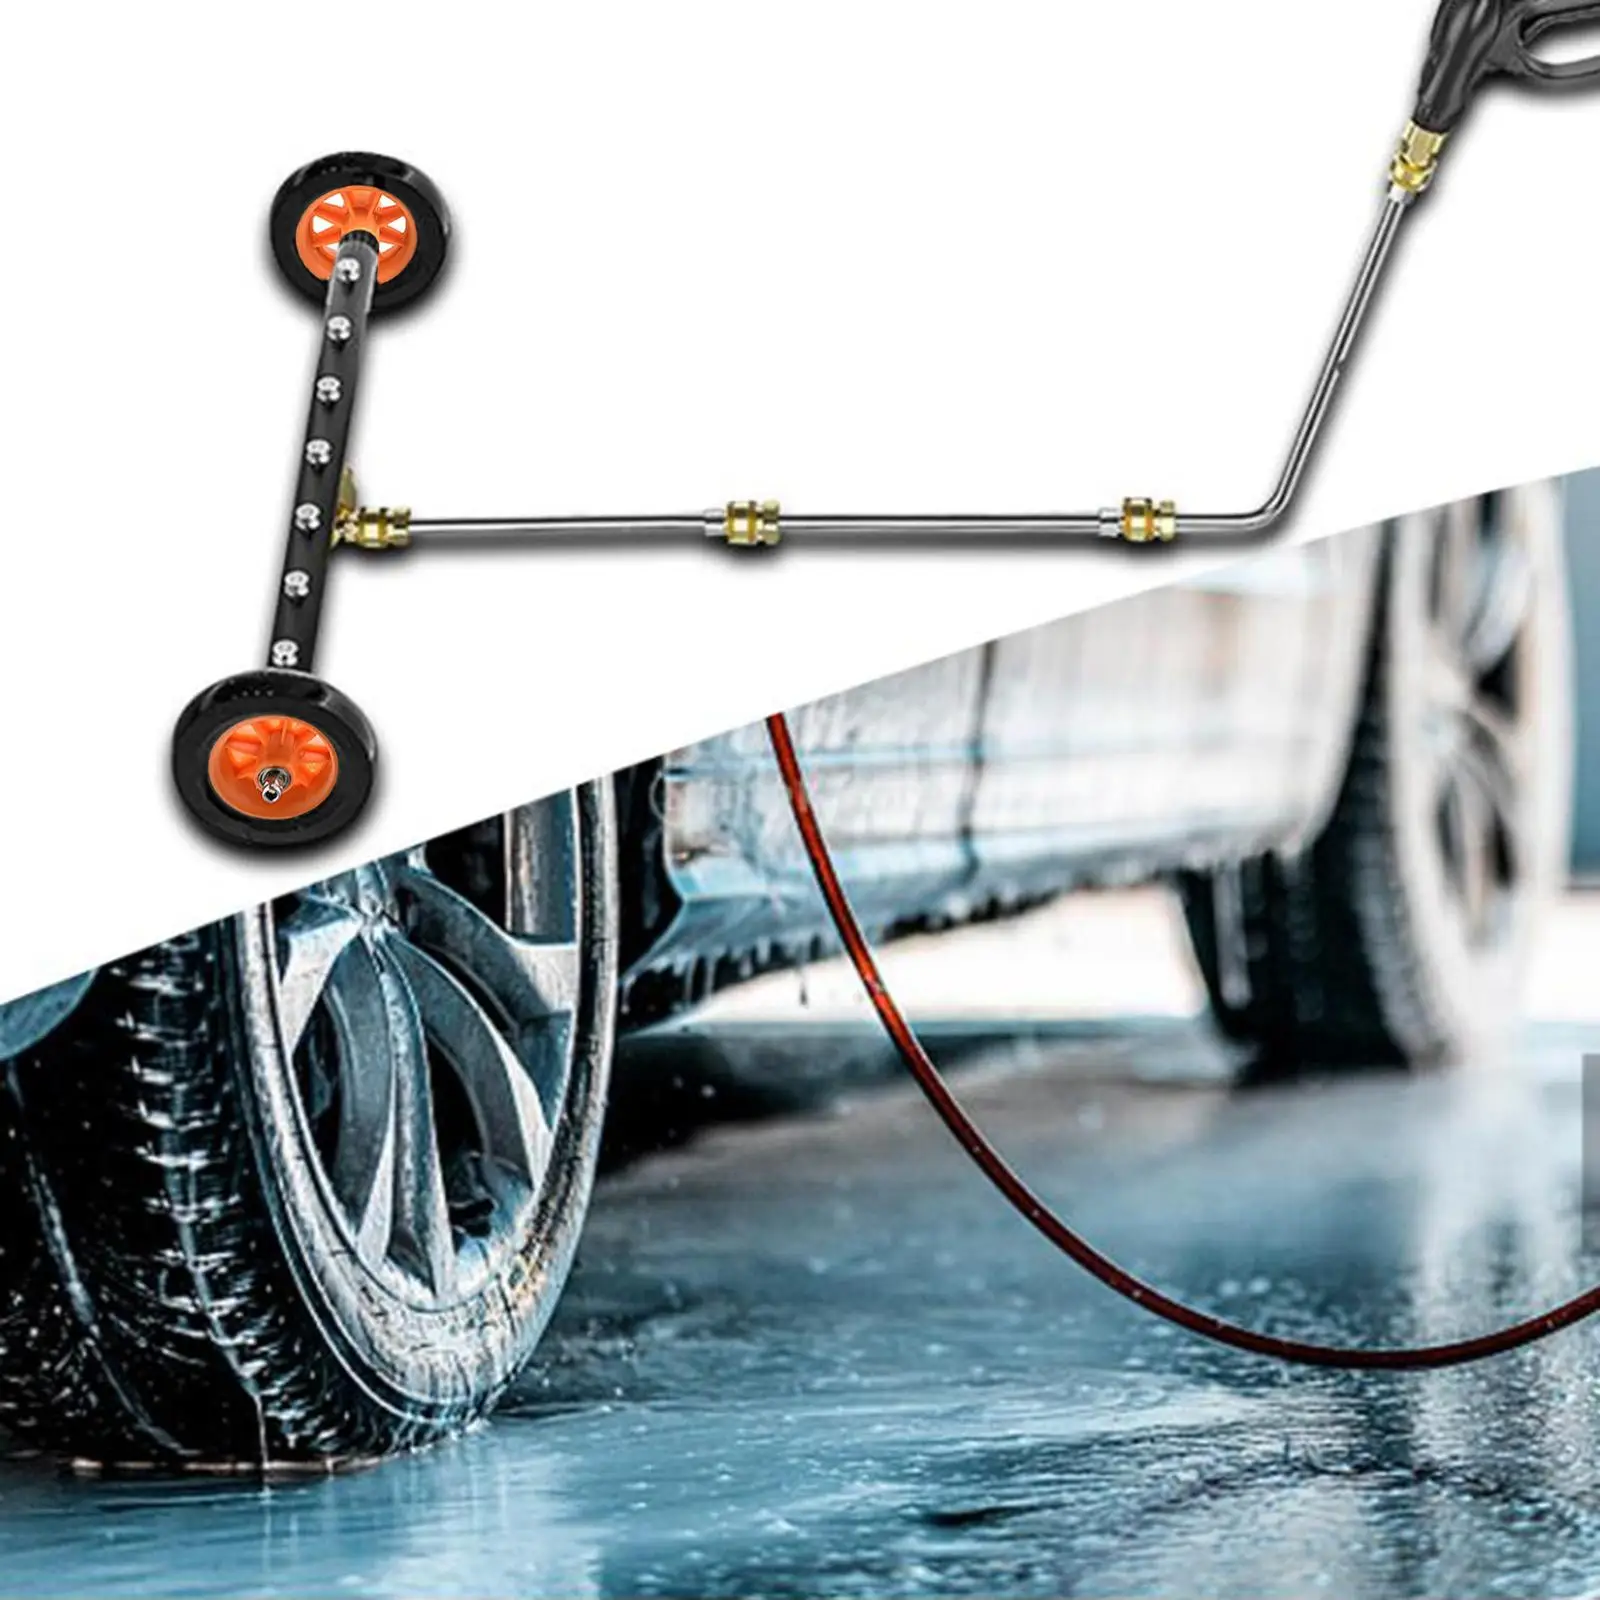 Pressure Washer Undercarriage Cleaner 4000PSI Car Chassis Cleaning 7 Nozzles Undercarriage Water Broom for Vehicles RV Truck SUV